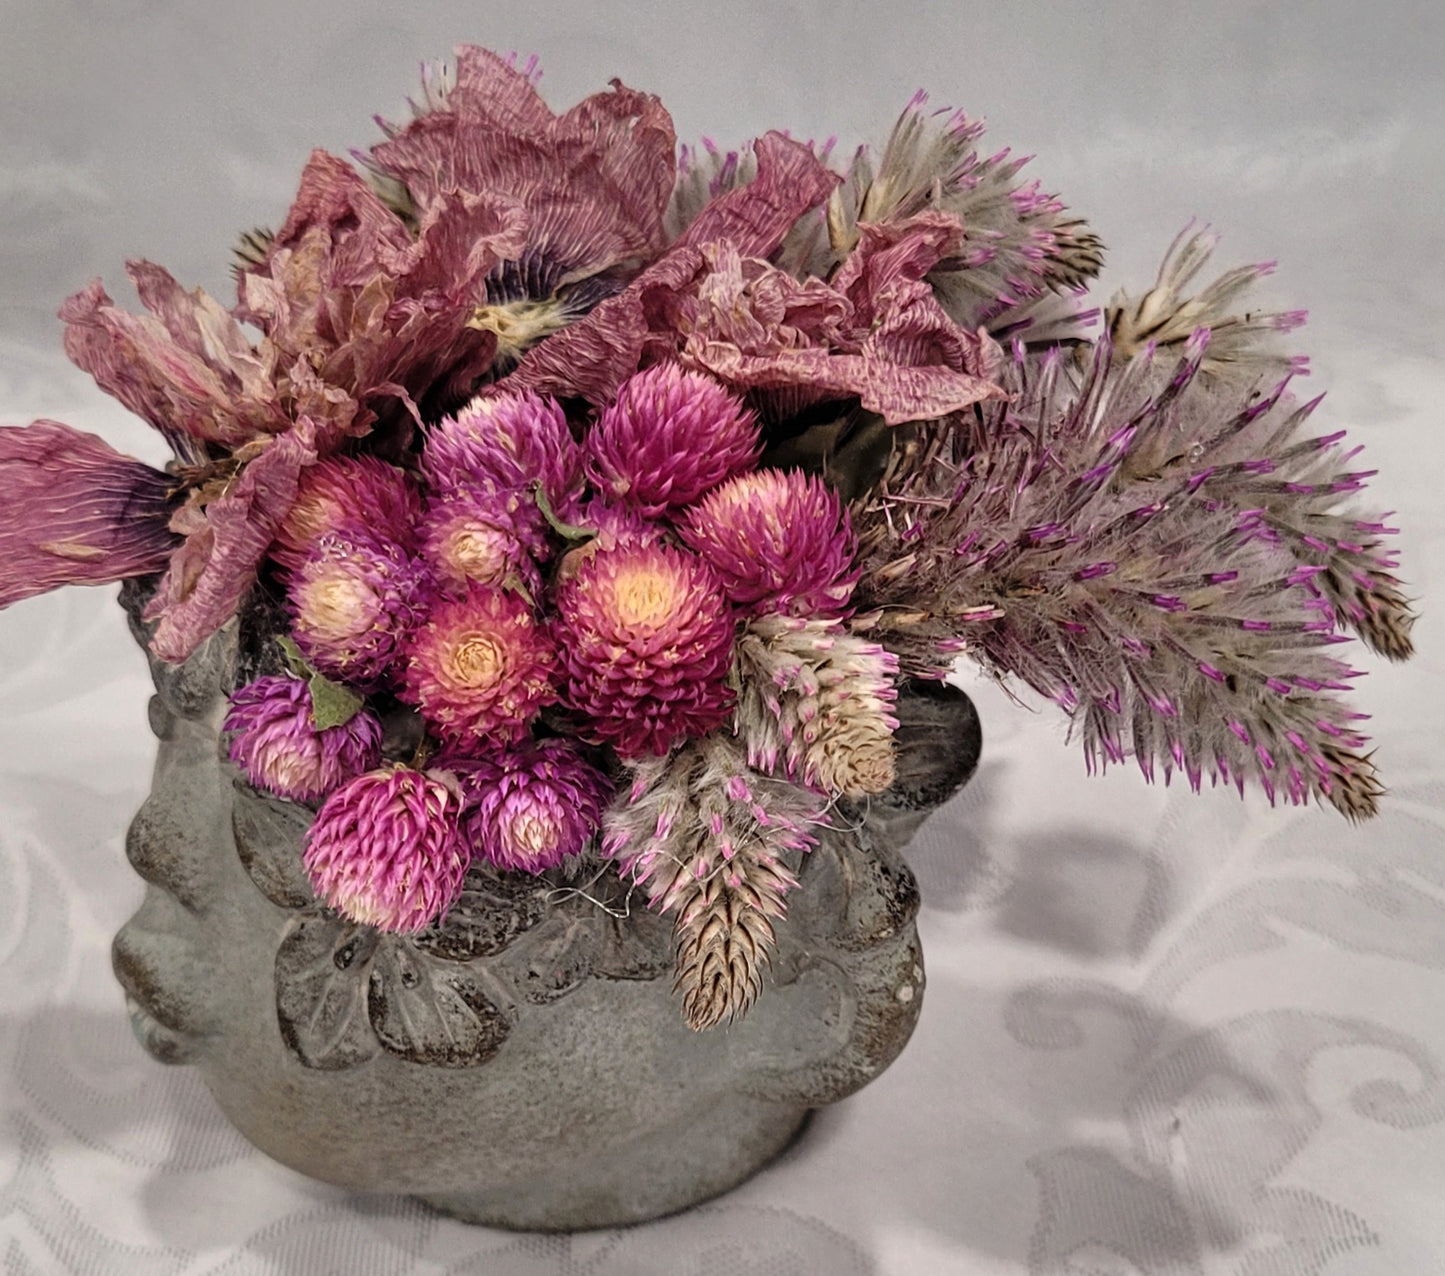 Dried flowers in a Cement Head Vase